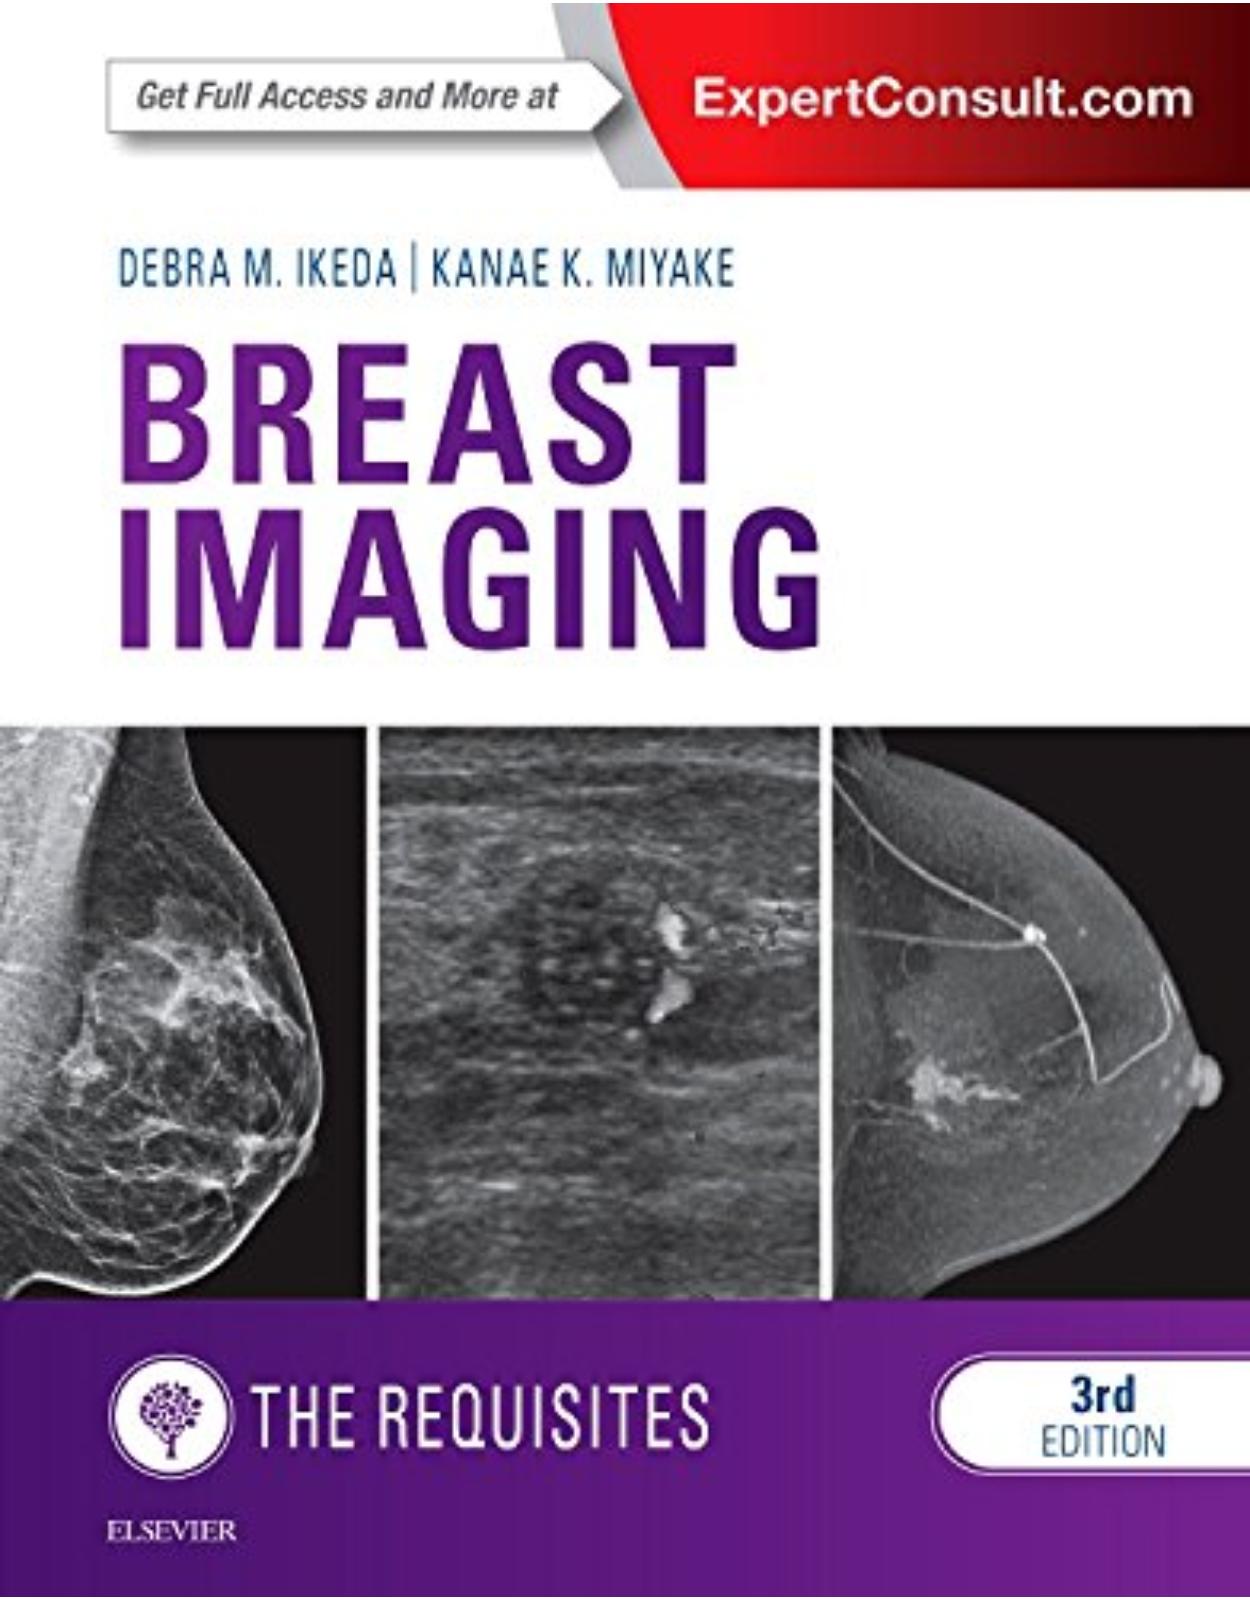 Breast Imaging: The Requisites, 3rd Edition